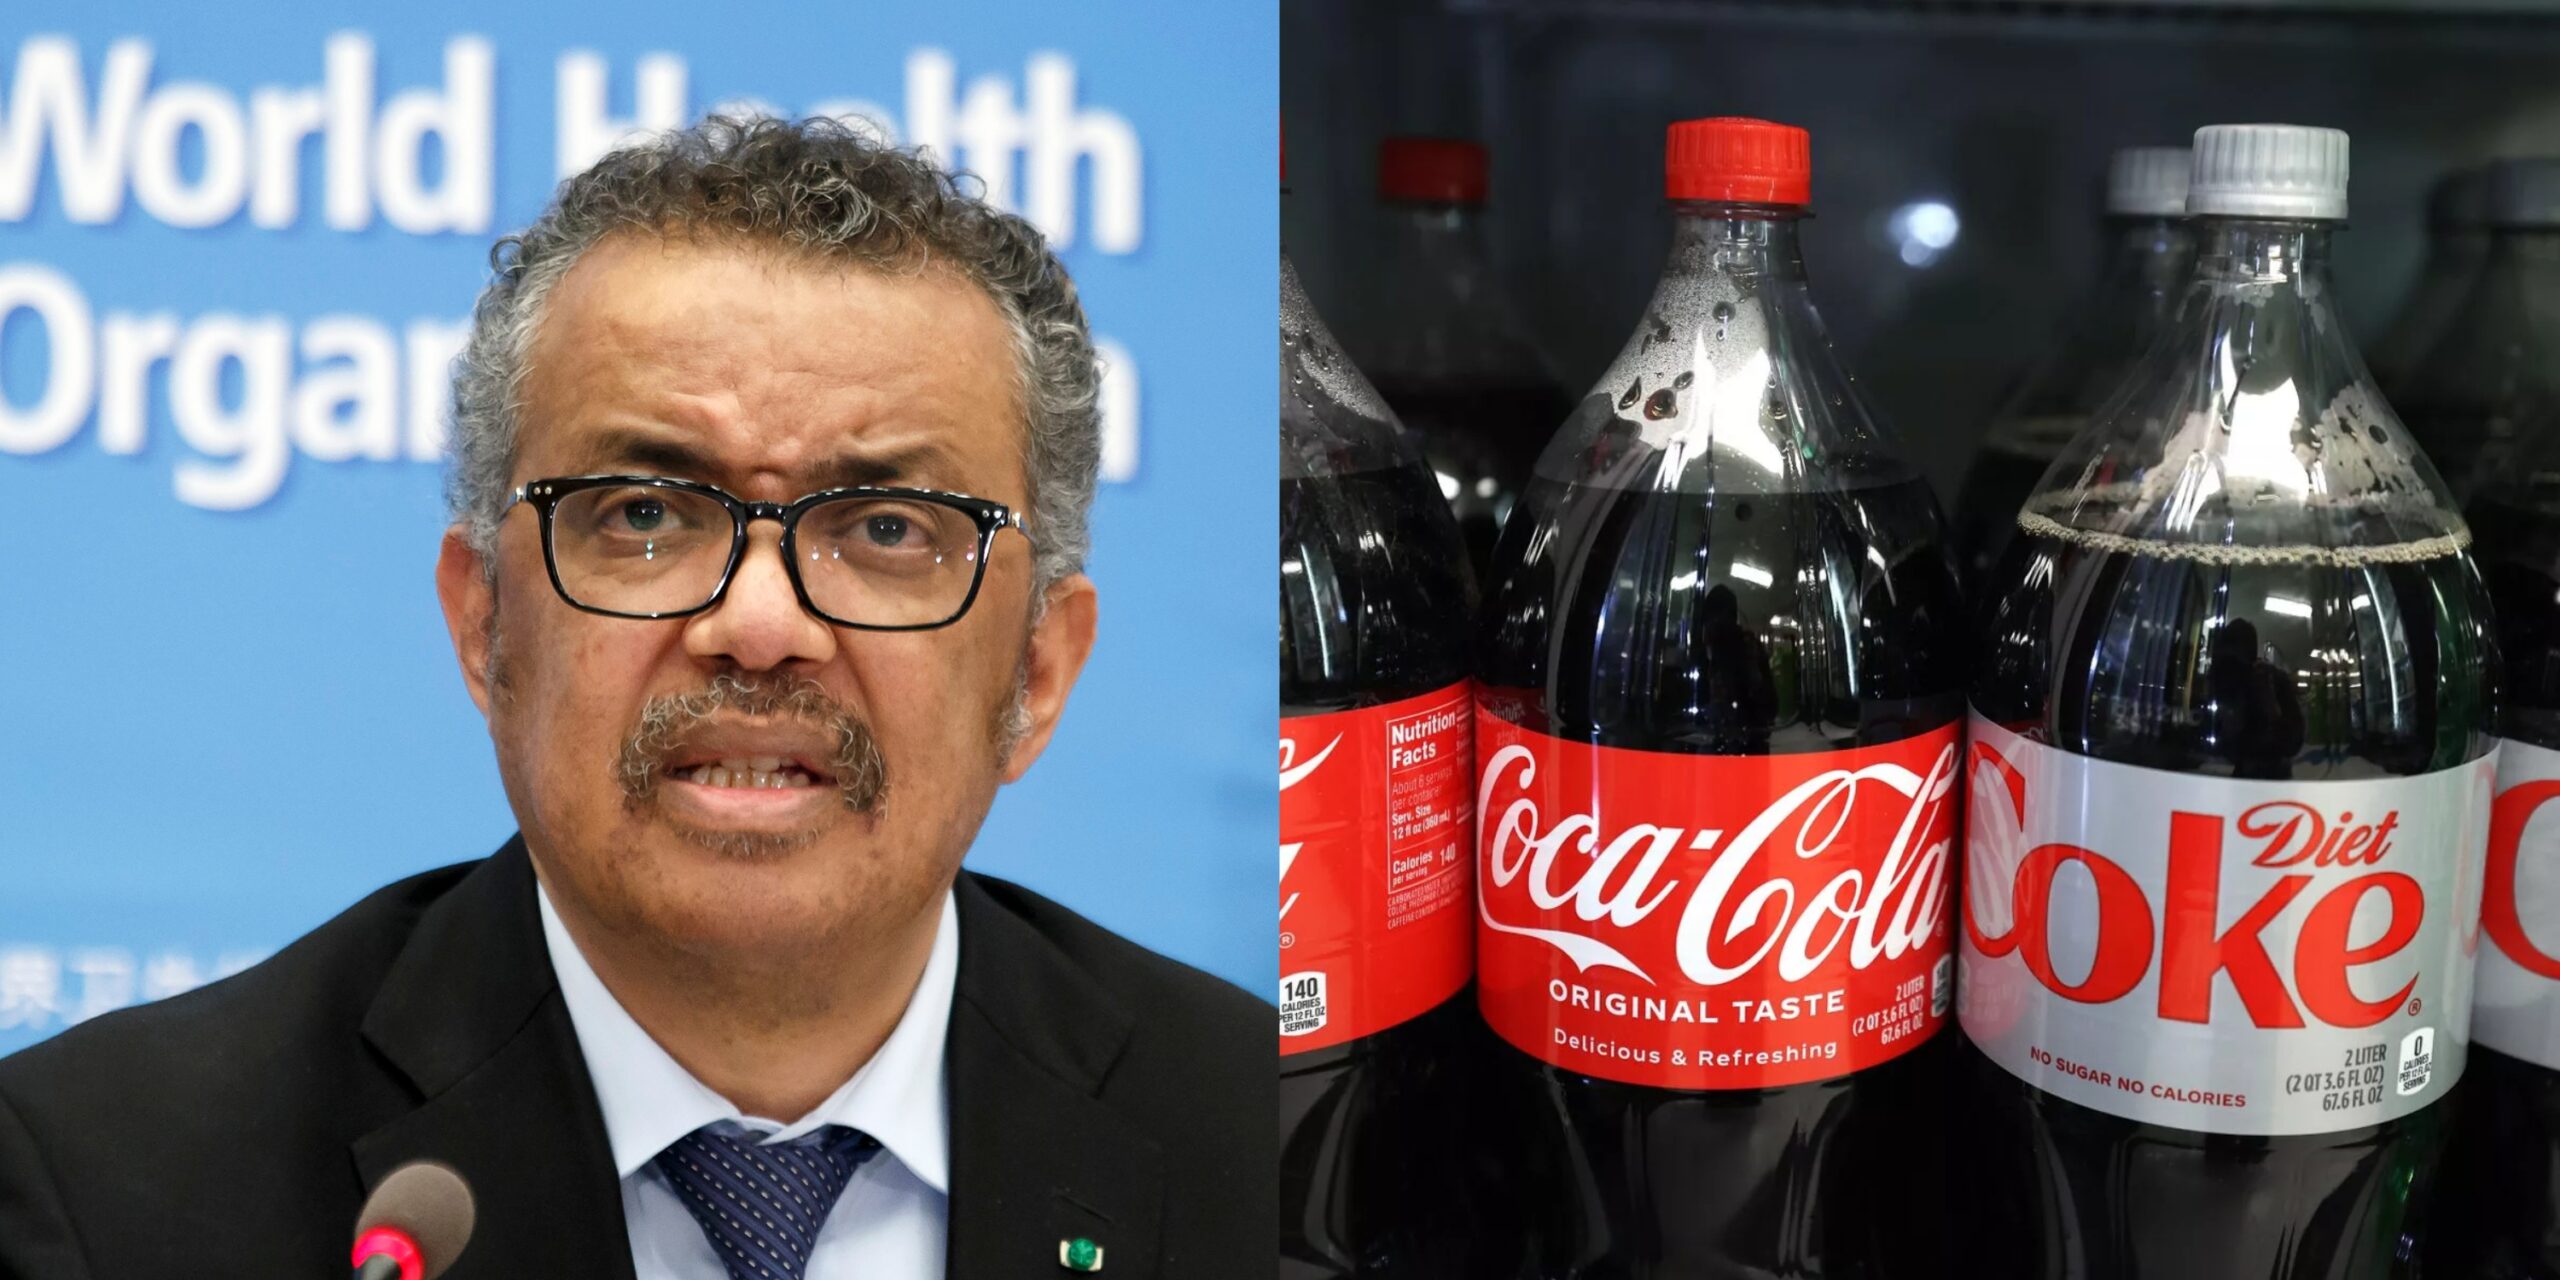 WHO set to label "aspartame" found in Coke and other products as cancer risk